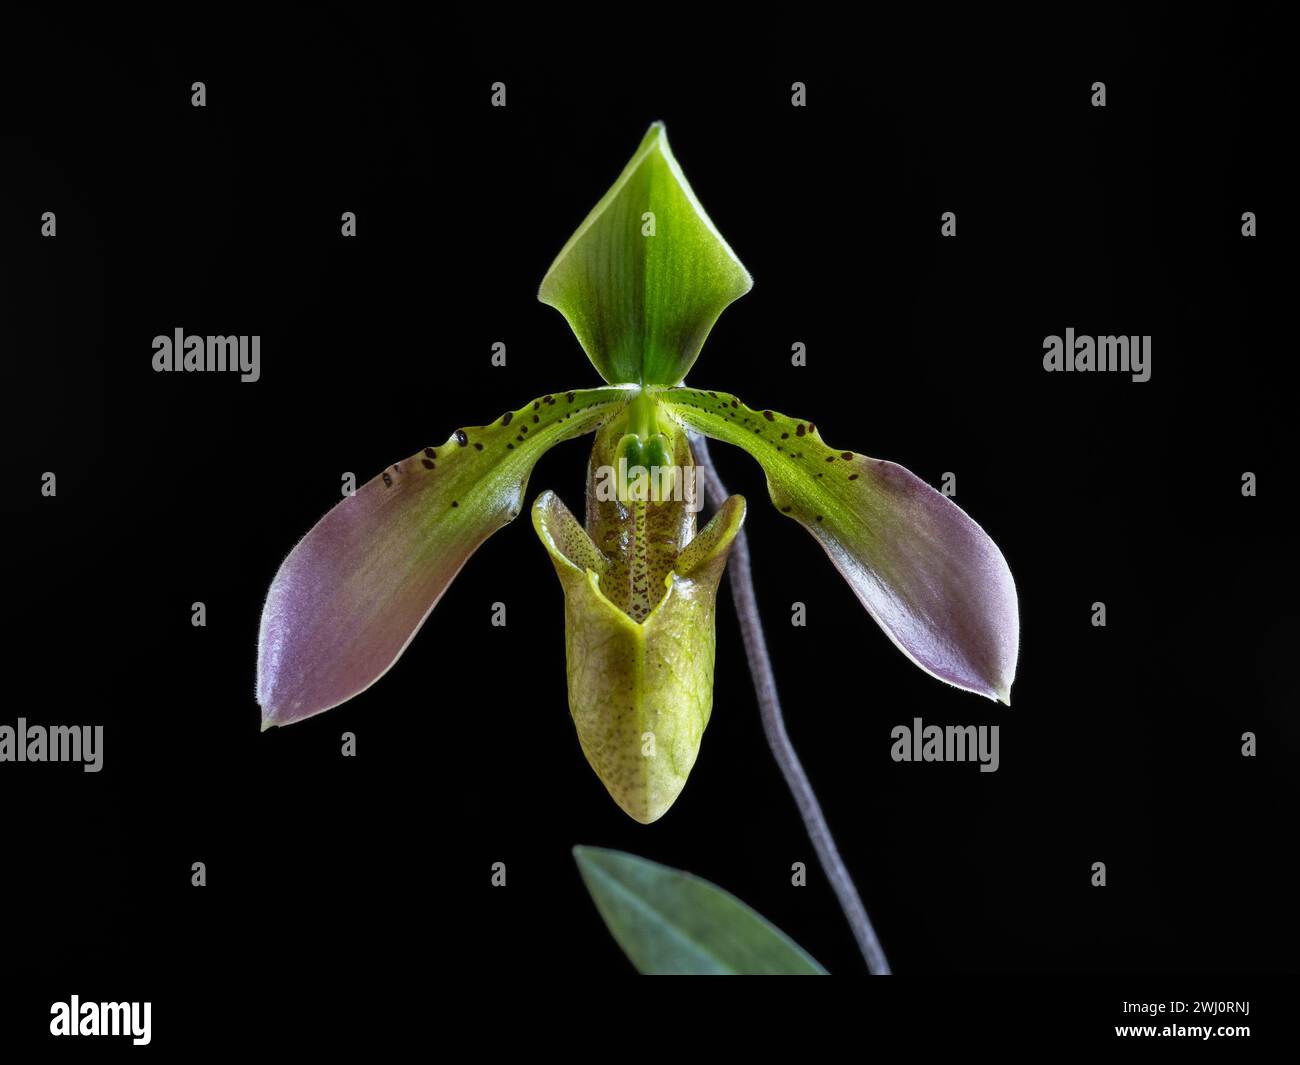 Closeup view of green, purple pink and brown flower of lady slipper orchid species paphiopedilum appletonianum isolated on black background Stock Photo